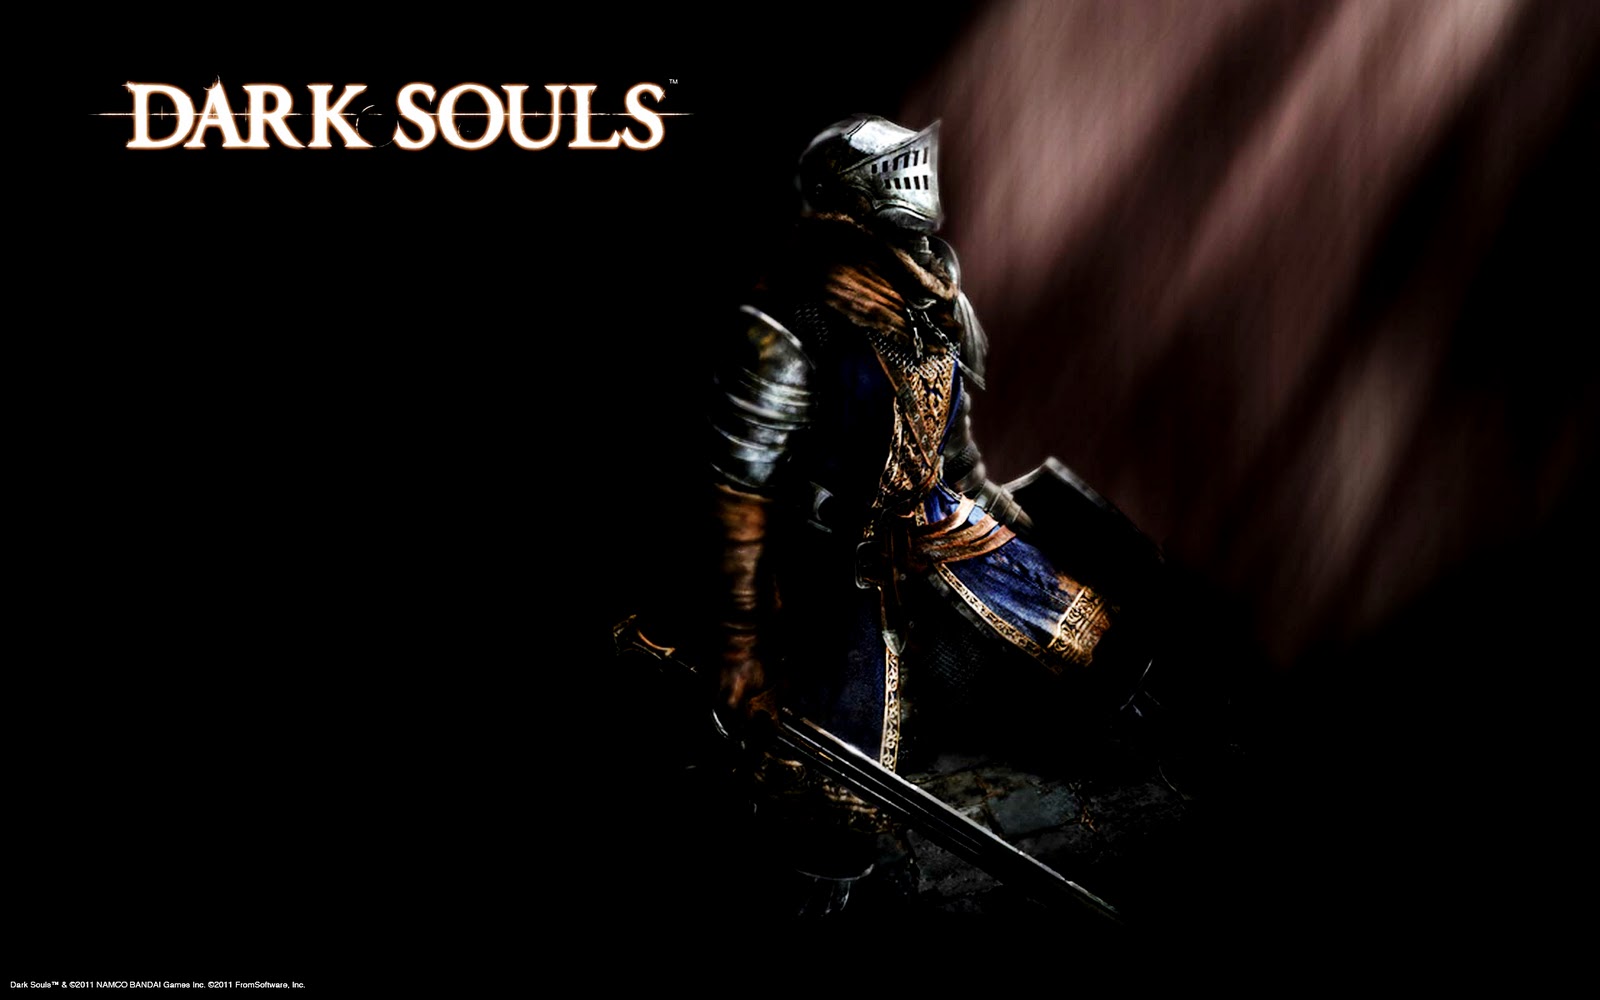 Dark Souls HD Wallpaper And Dvd Cover In